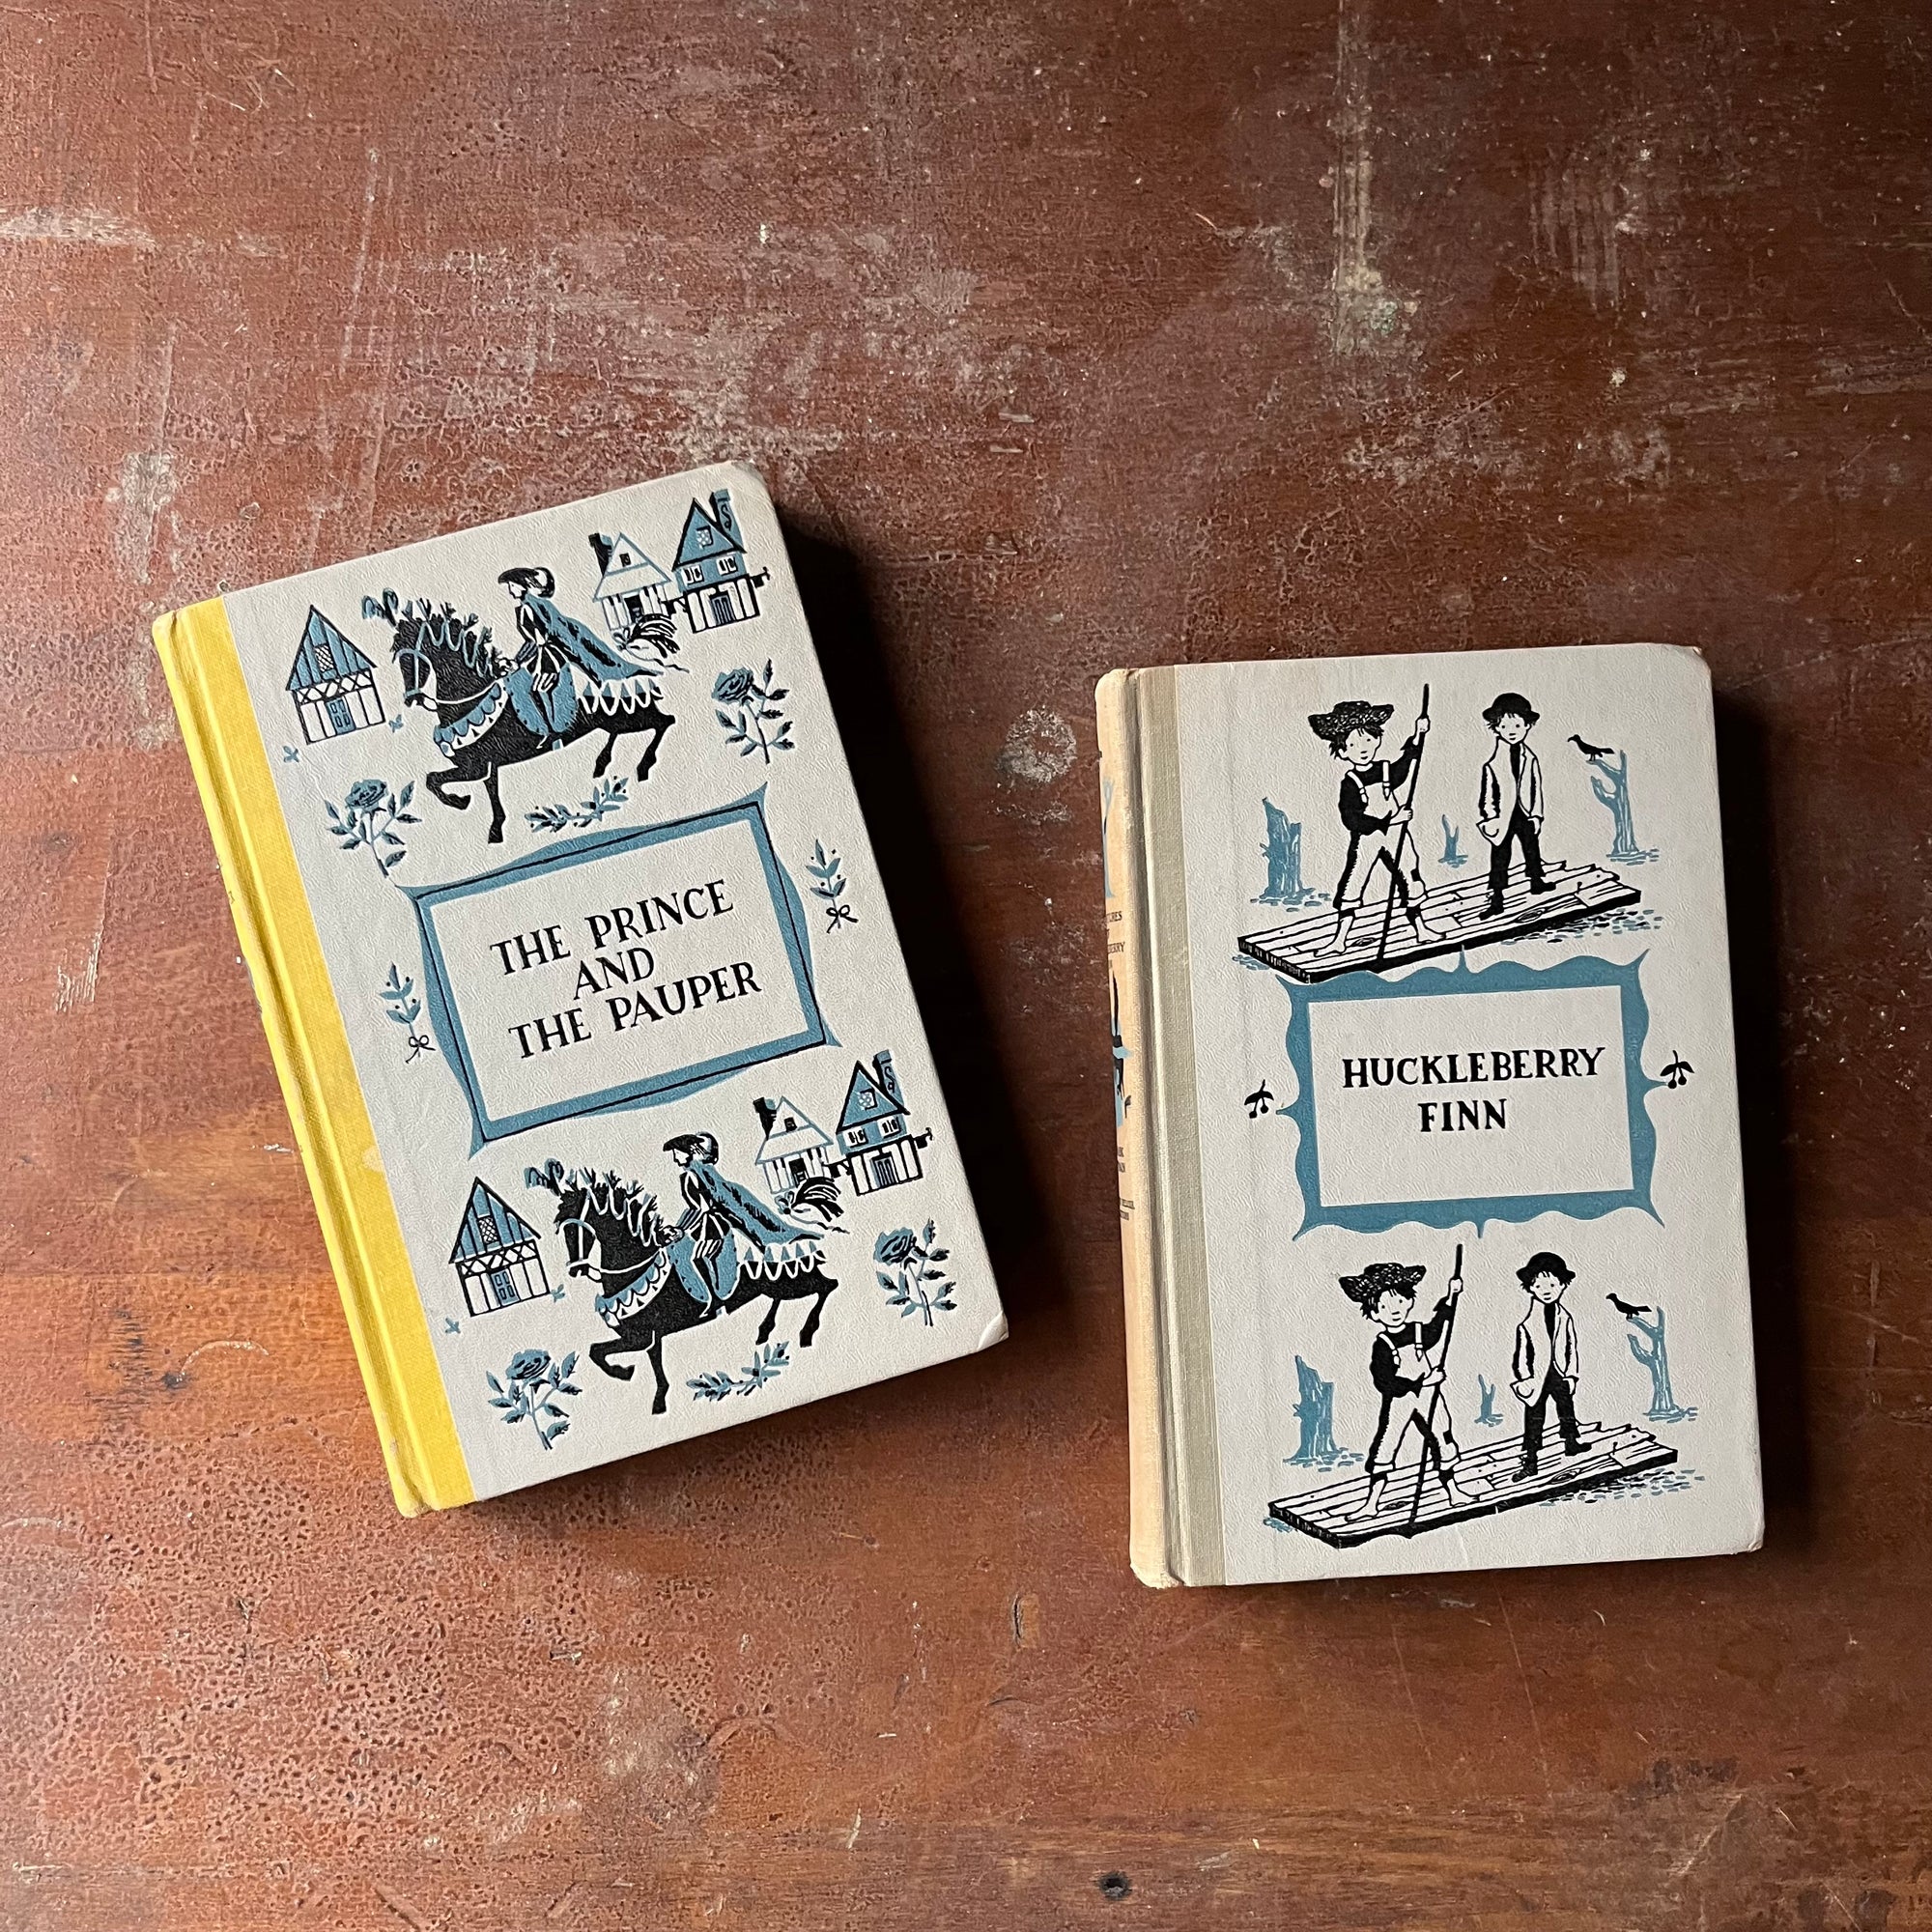 vintage children's books, classic American Literature - Pair of Junior Deluxe Editions Books Written by Mark Twain - The Adventures of Huckleberry Finn & The Prince and the Pauper - view of the decorative front covers